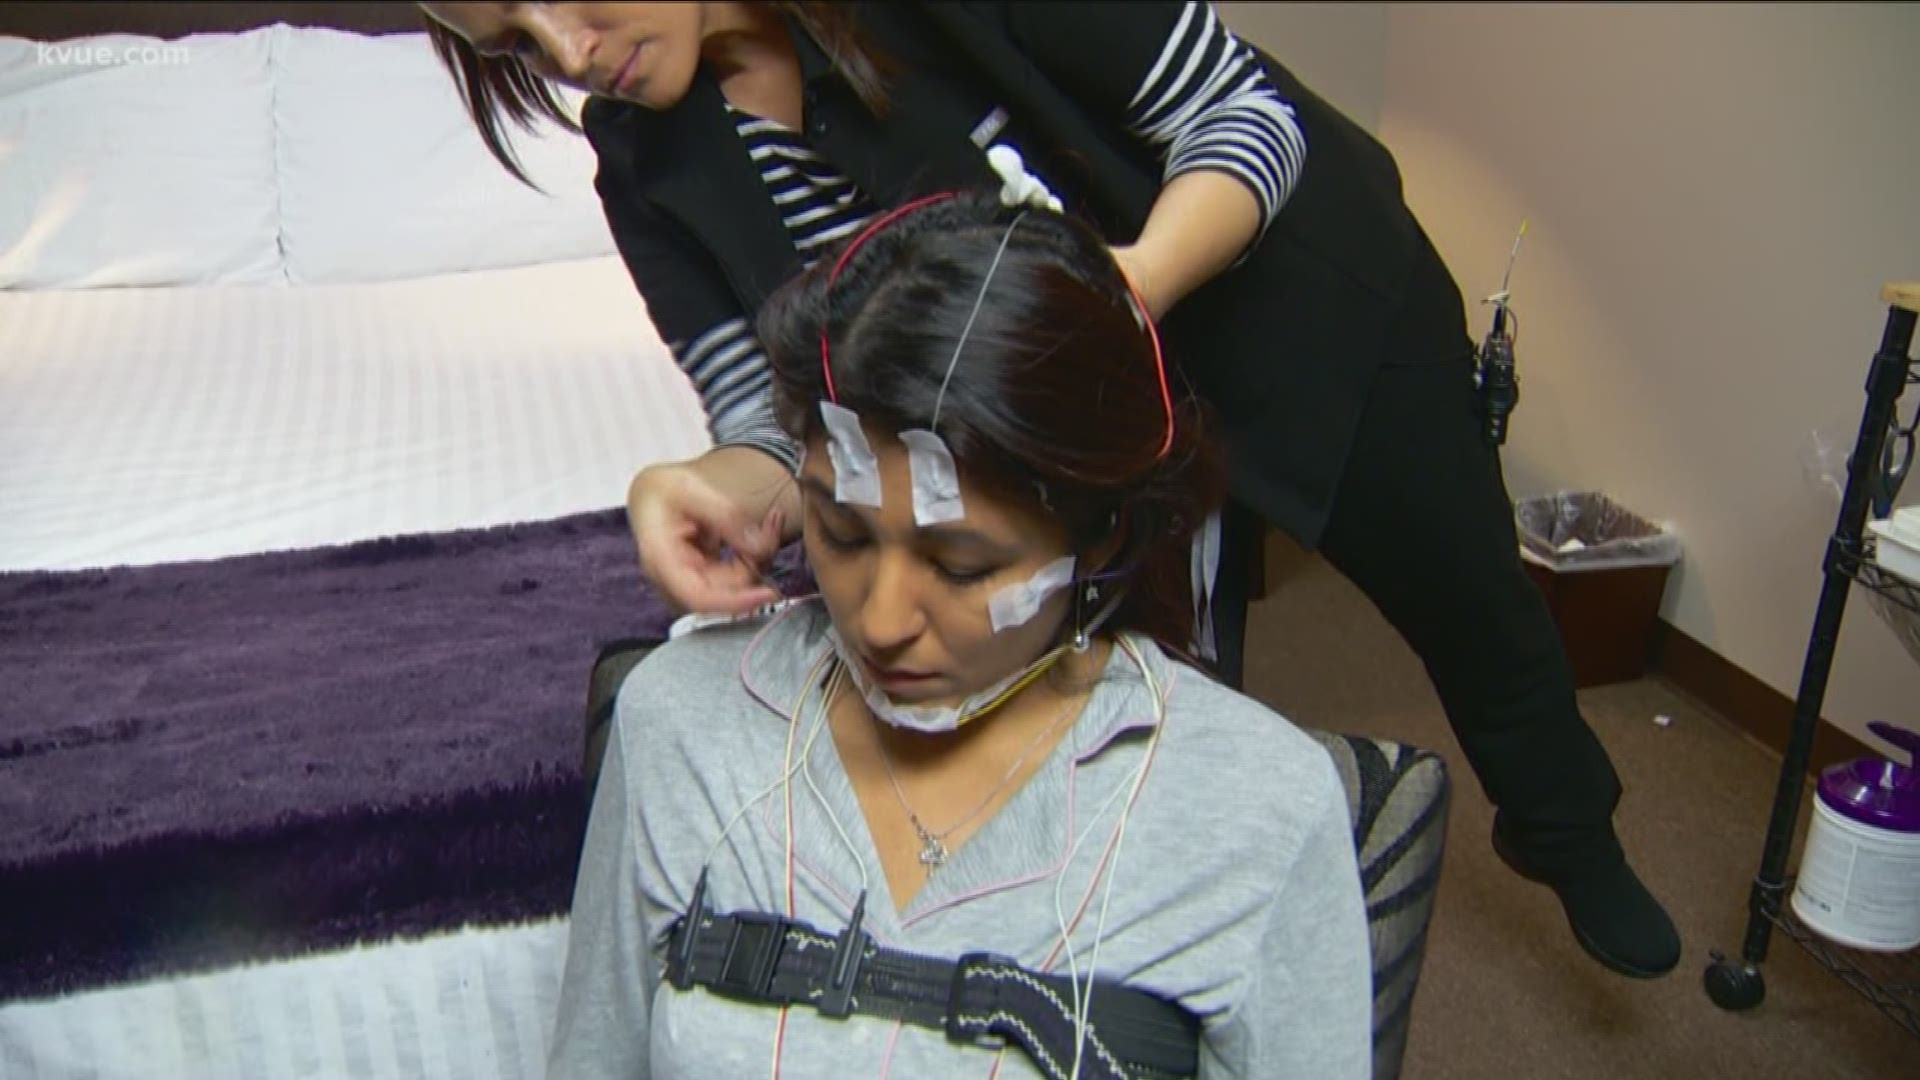 KVUE paid a visit to the Sleep Center of Austin to see how exactly a sleep study is administered.